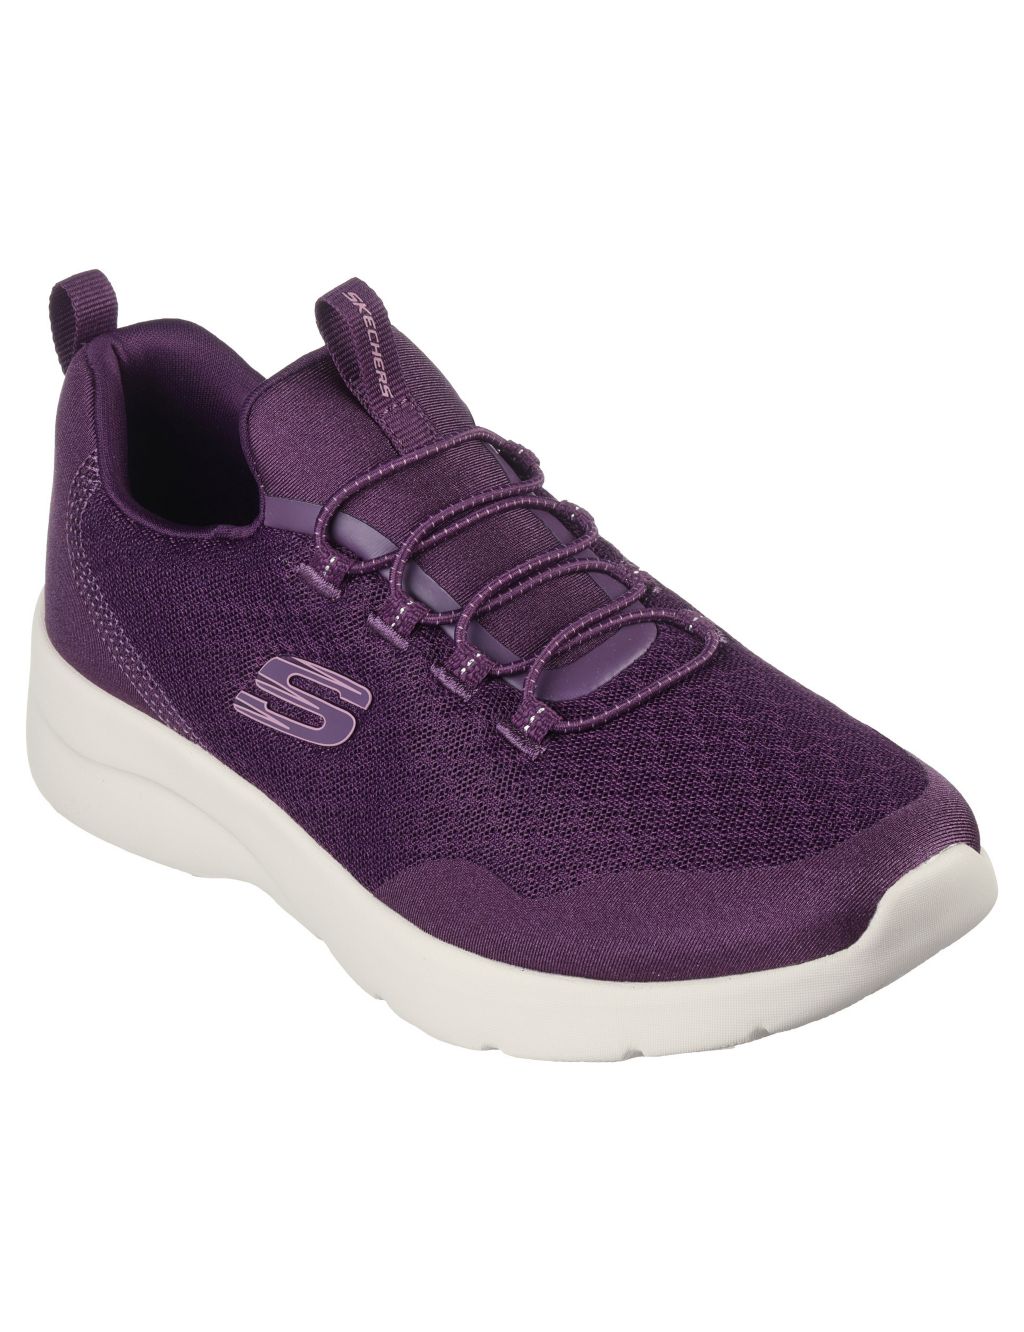 Dynamight 2.0 Real Smooth Slip On Trainers image 2